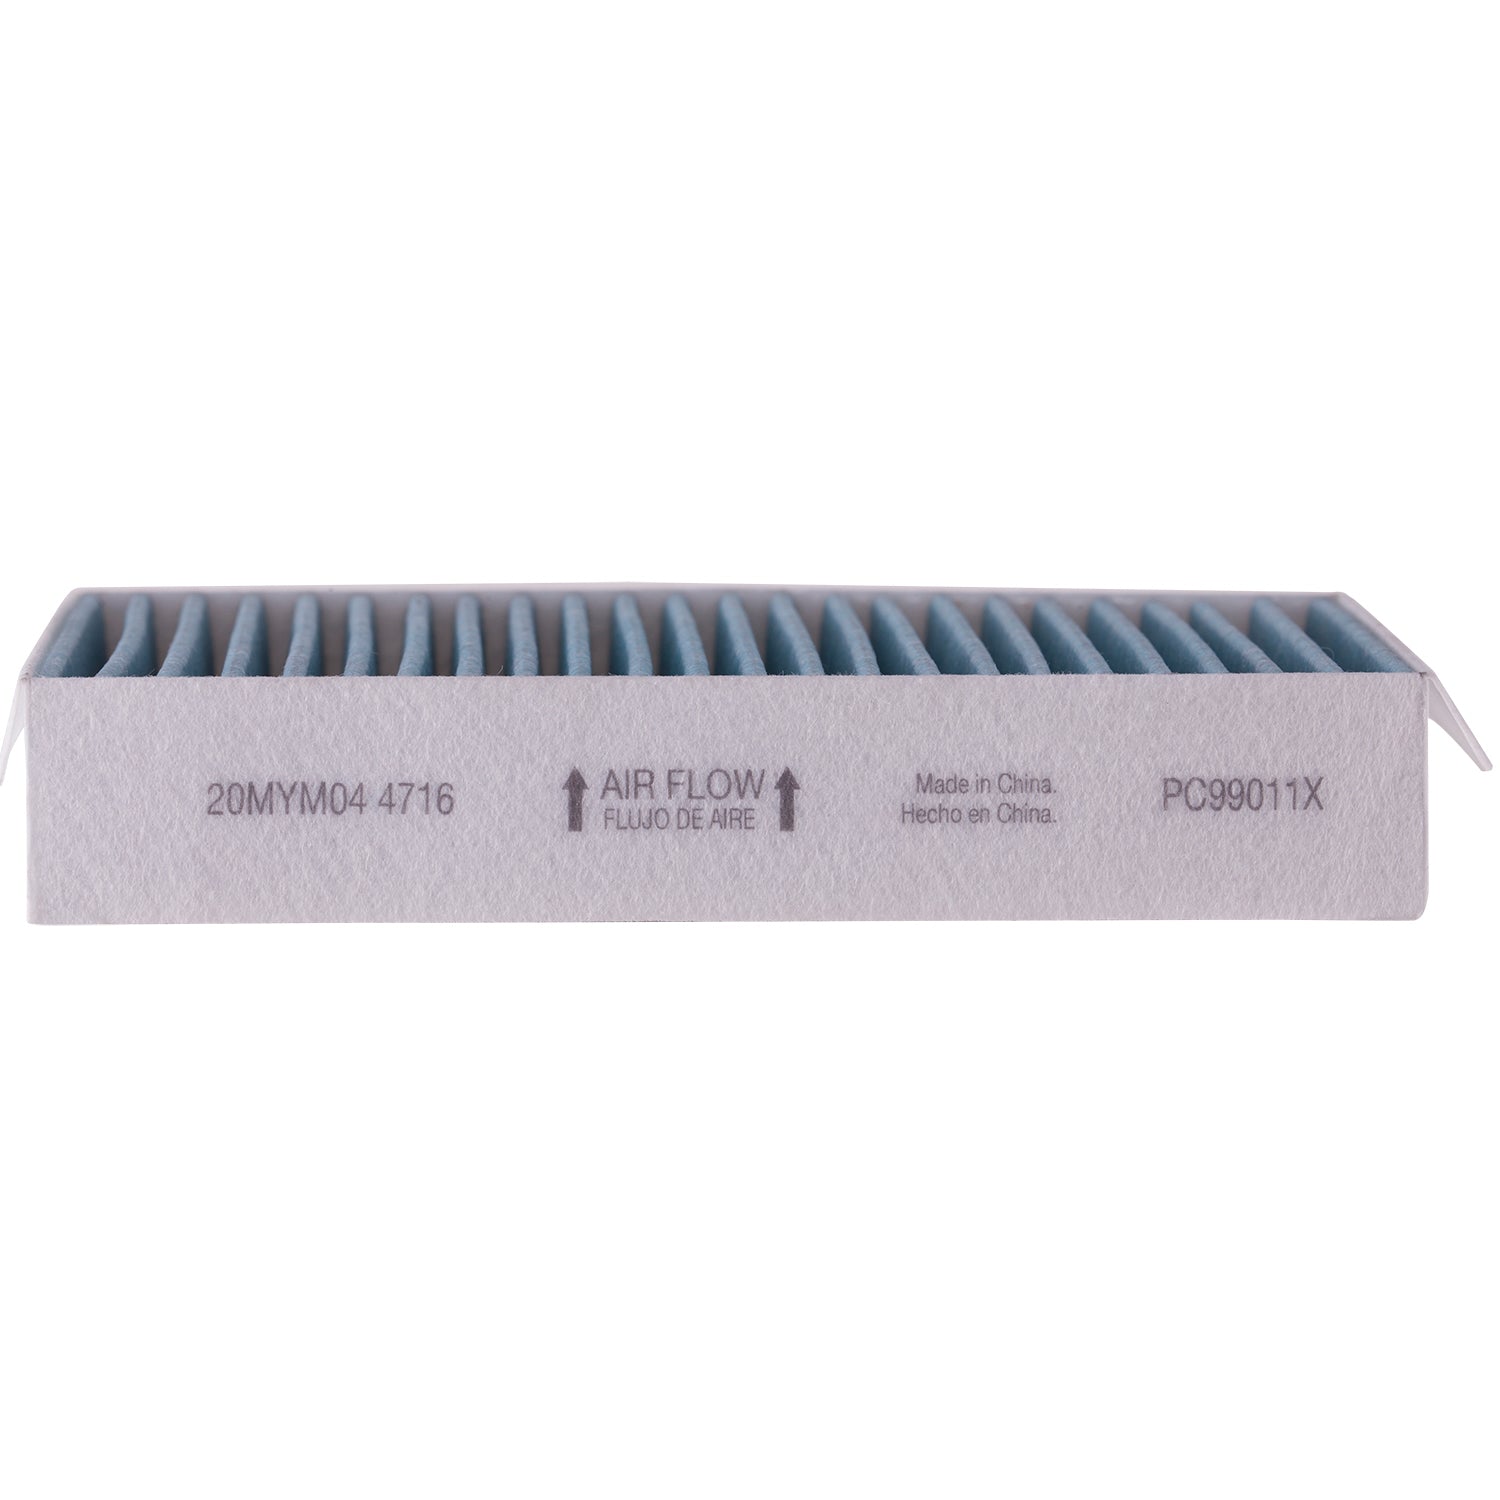 PUREFLOW 2013 Mercedes-Benz CLA250 Cabin Air Filter with Antibacterial Technology, PC99011X